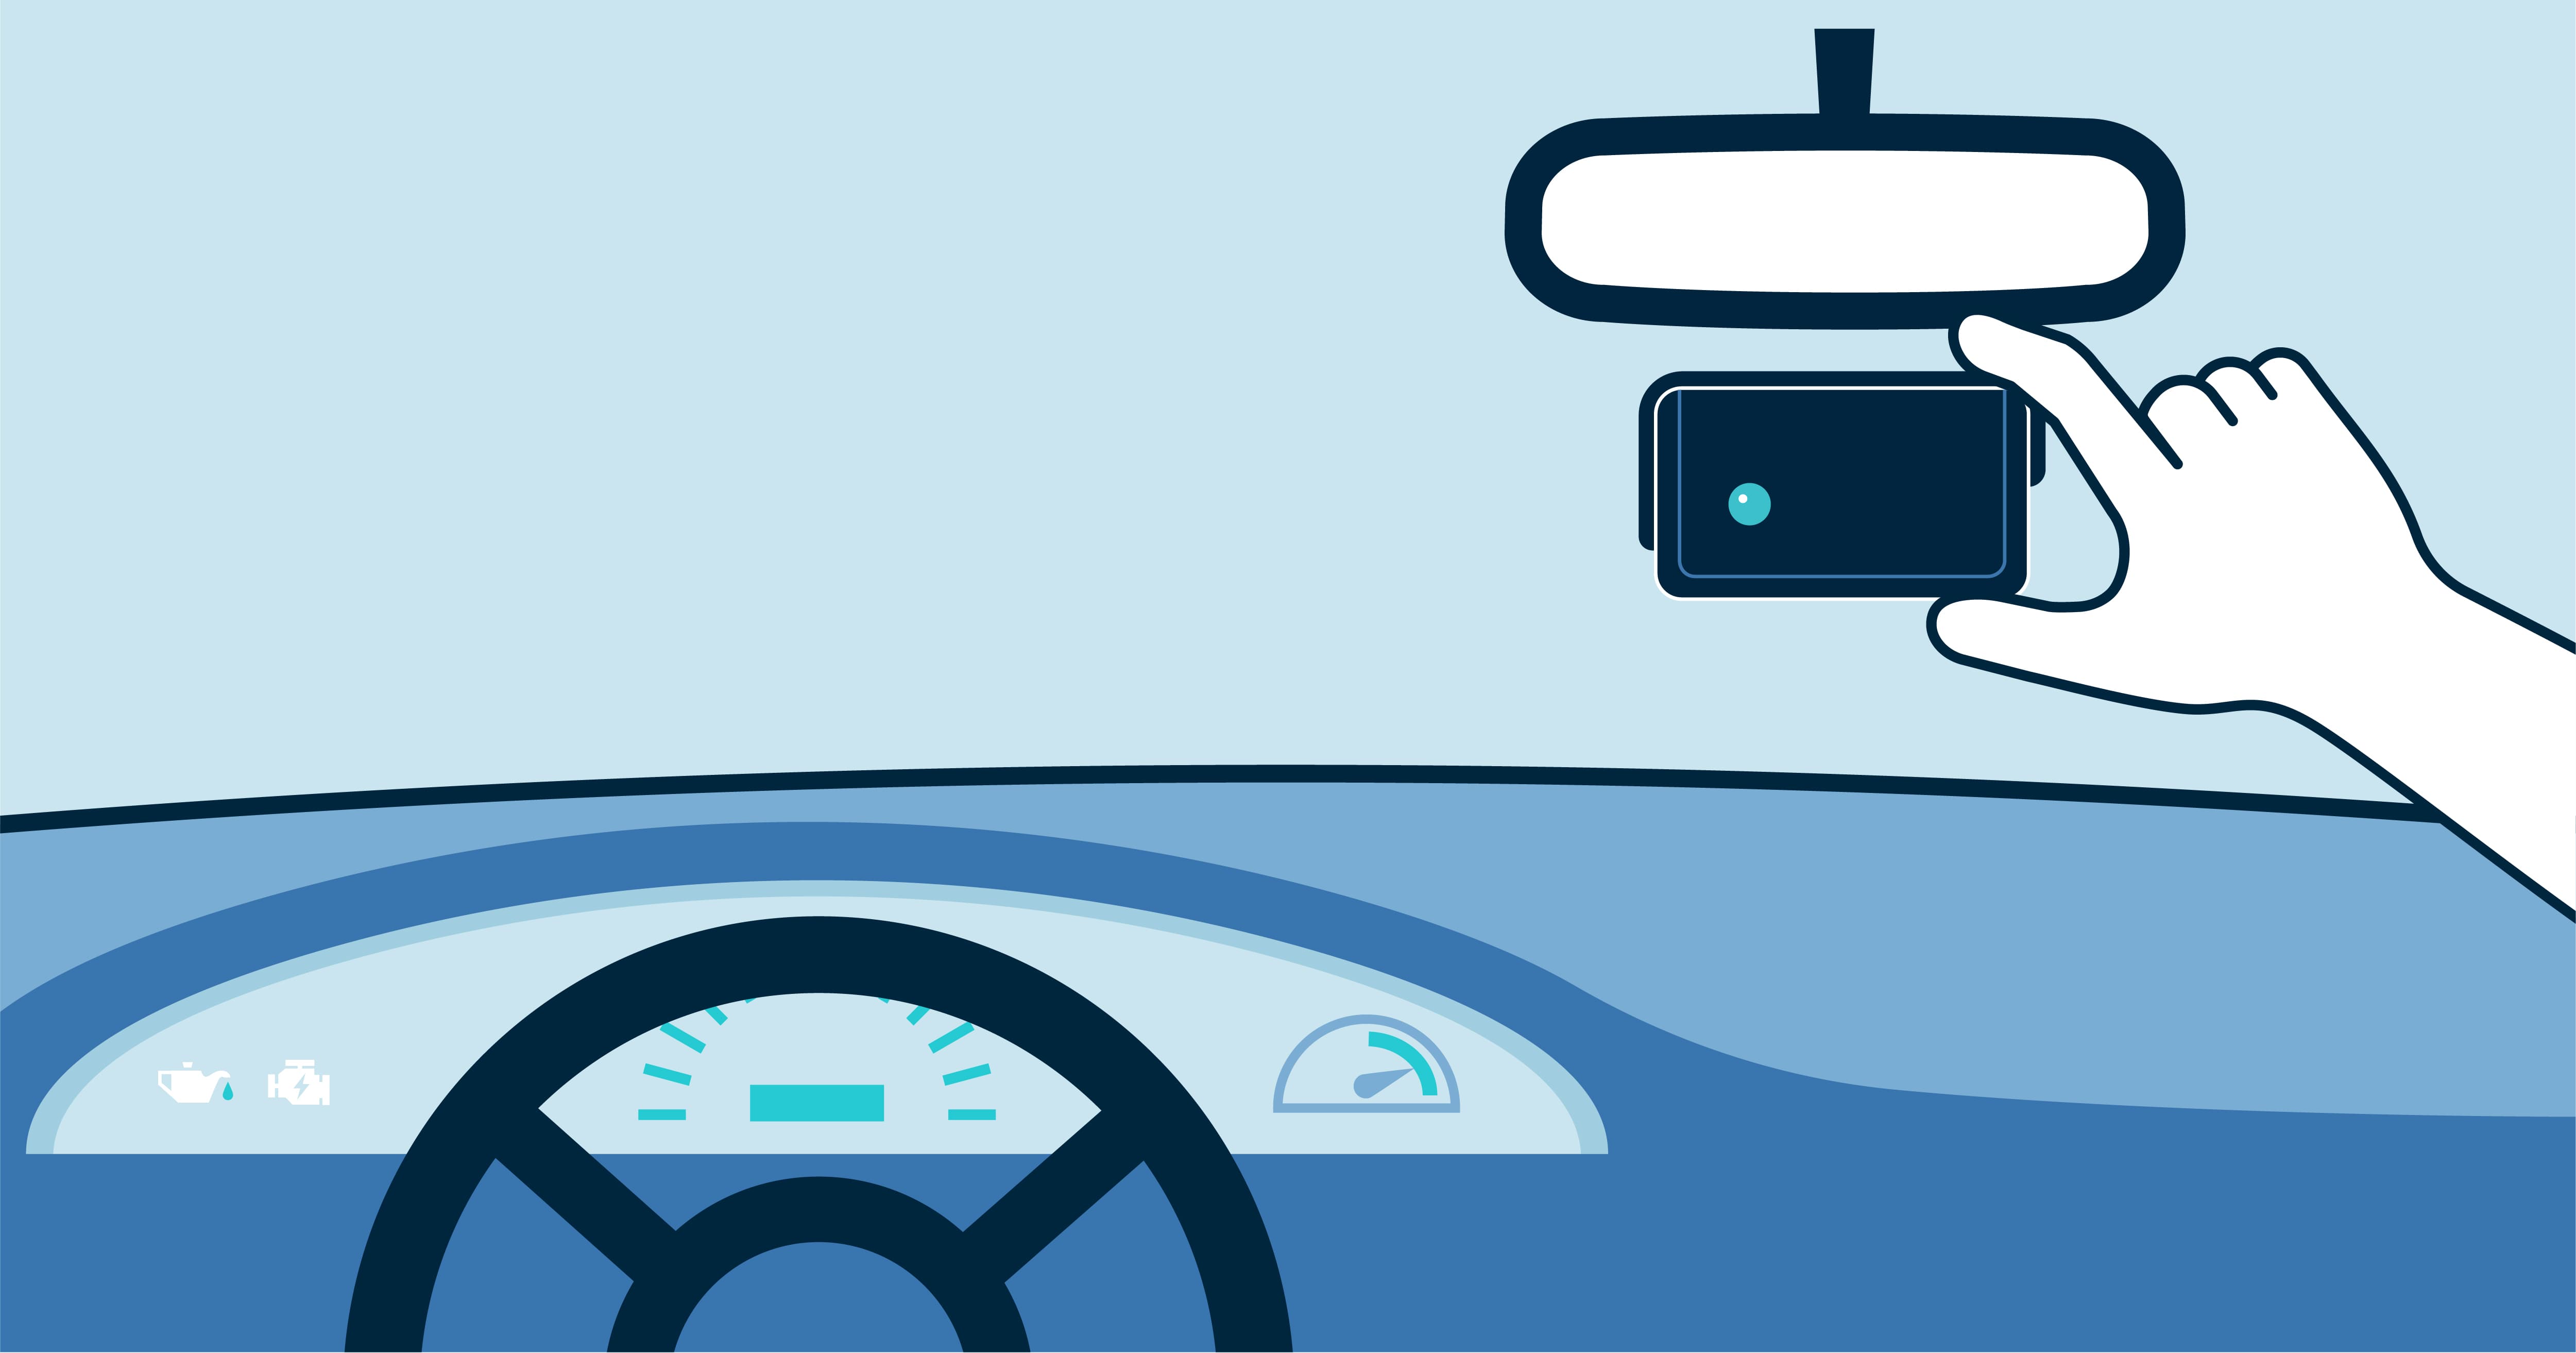 How to install a dashcam in your car